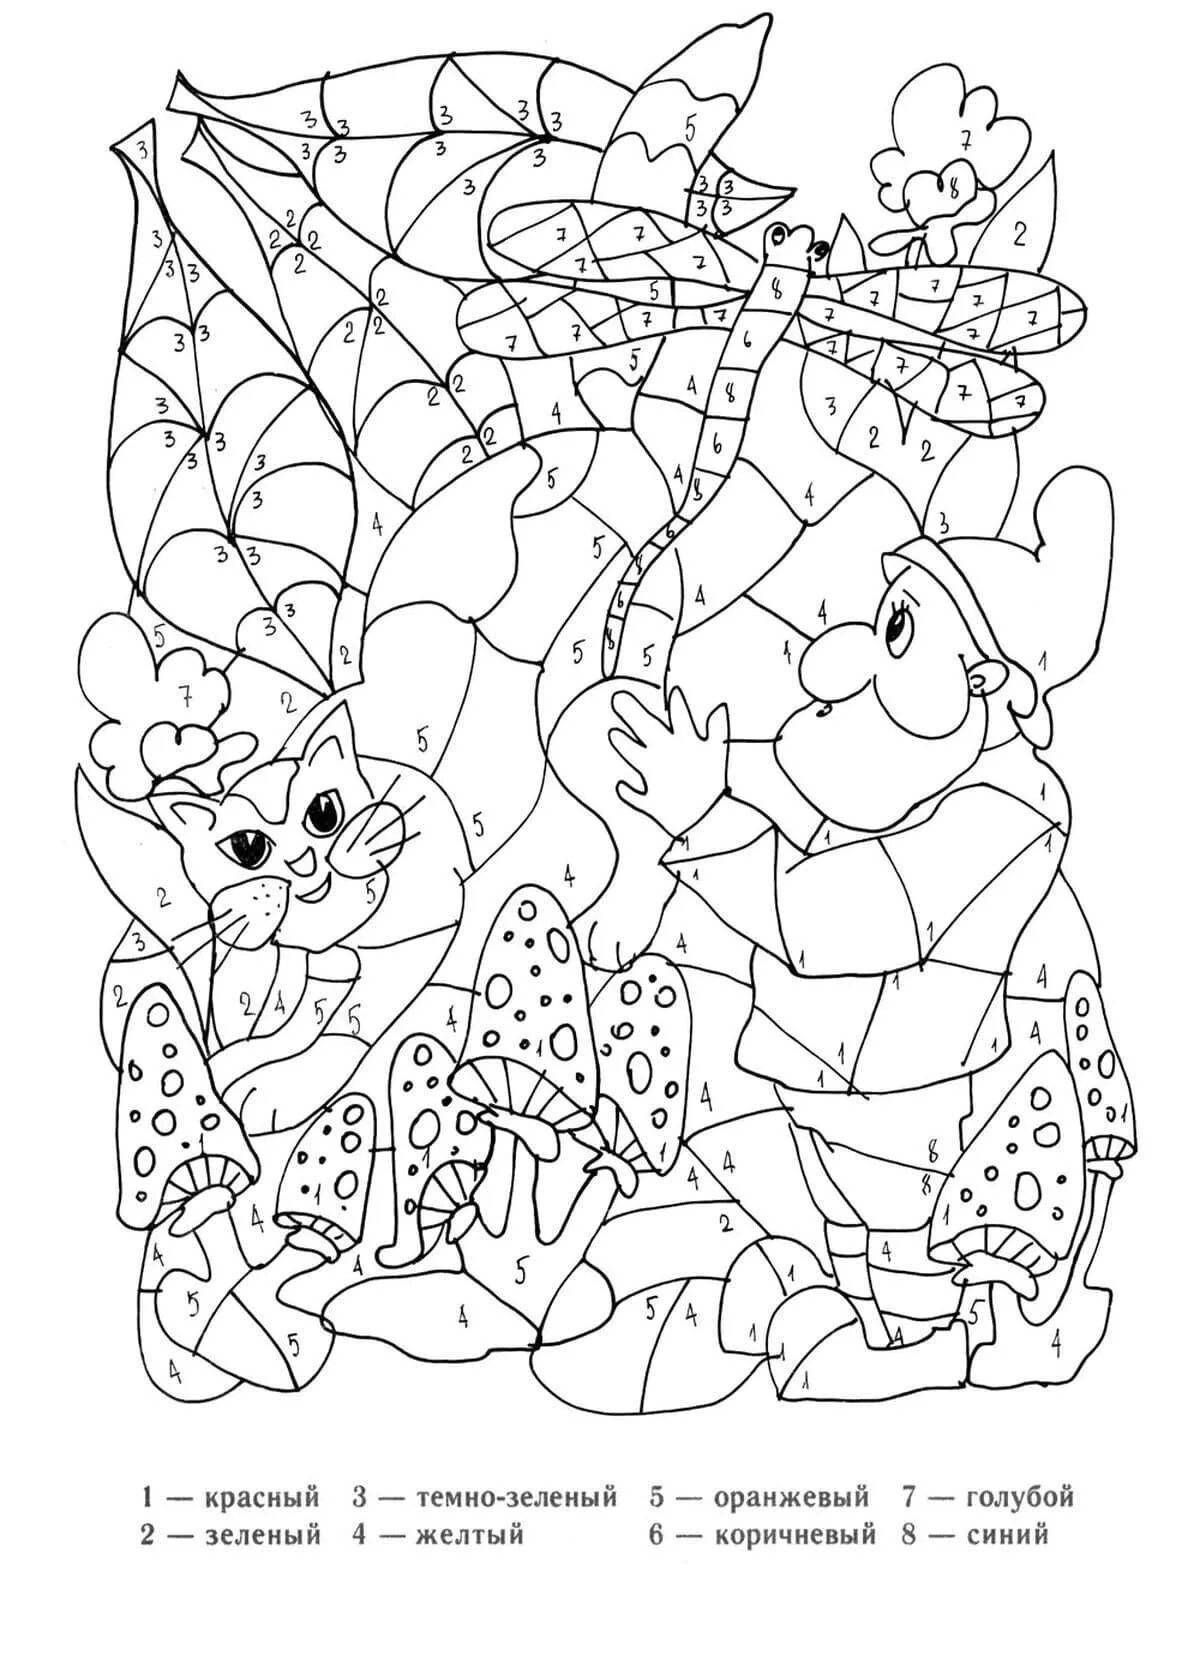 Adorable coloring of mosaic figurines